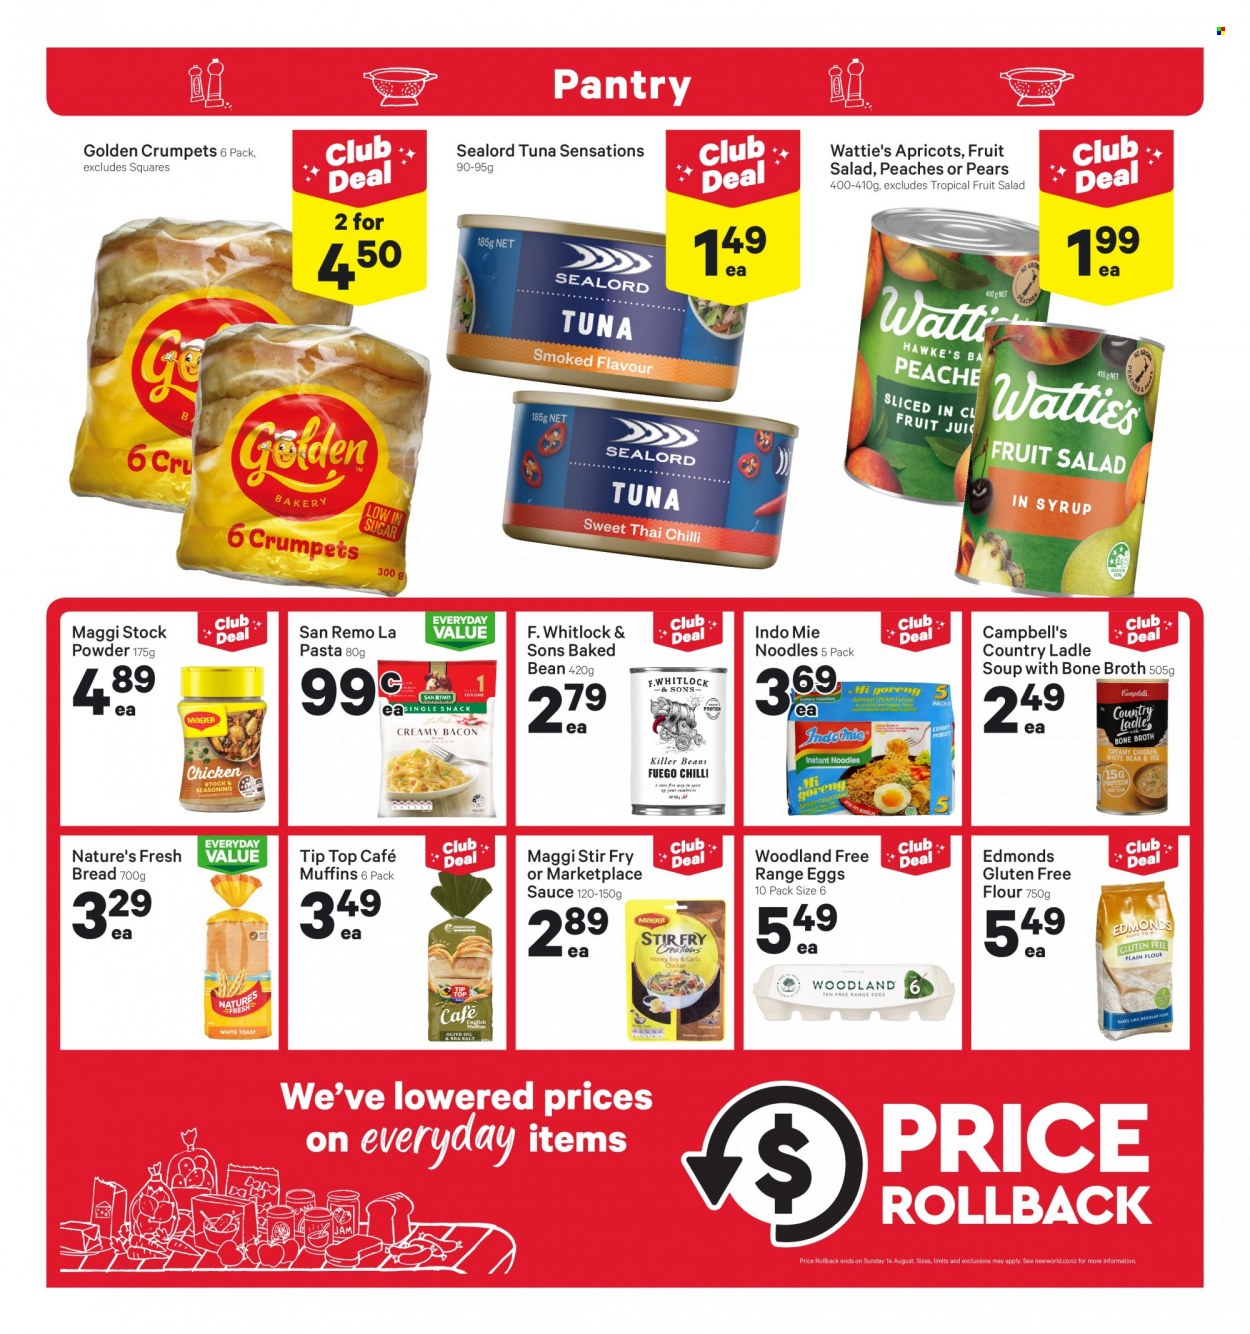 thumbnail - New World mailer - 27.06.2022 - 03.07.2022 - Sales products - bread, Tip Top, crumpets, muffin, beans, pears, apricots, peaches, tuna, Sealord, Campbell's, soup, pasta, instant noodles, sauce, noodles, Wattie's, bacon, eggs, snack, flour, Maggi, broth, sealord tuna, fruit salad, spice, olive oil, oil, honey. Page 17.